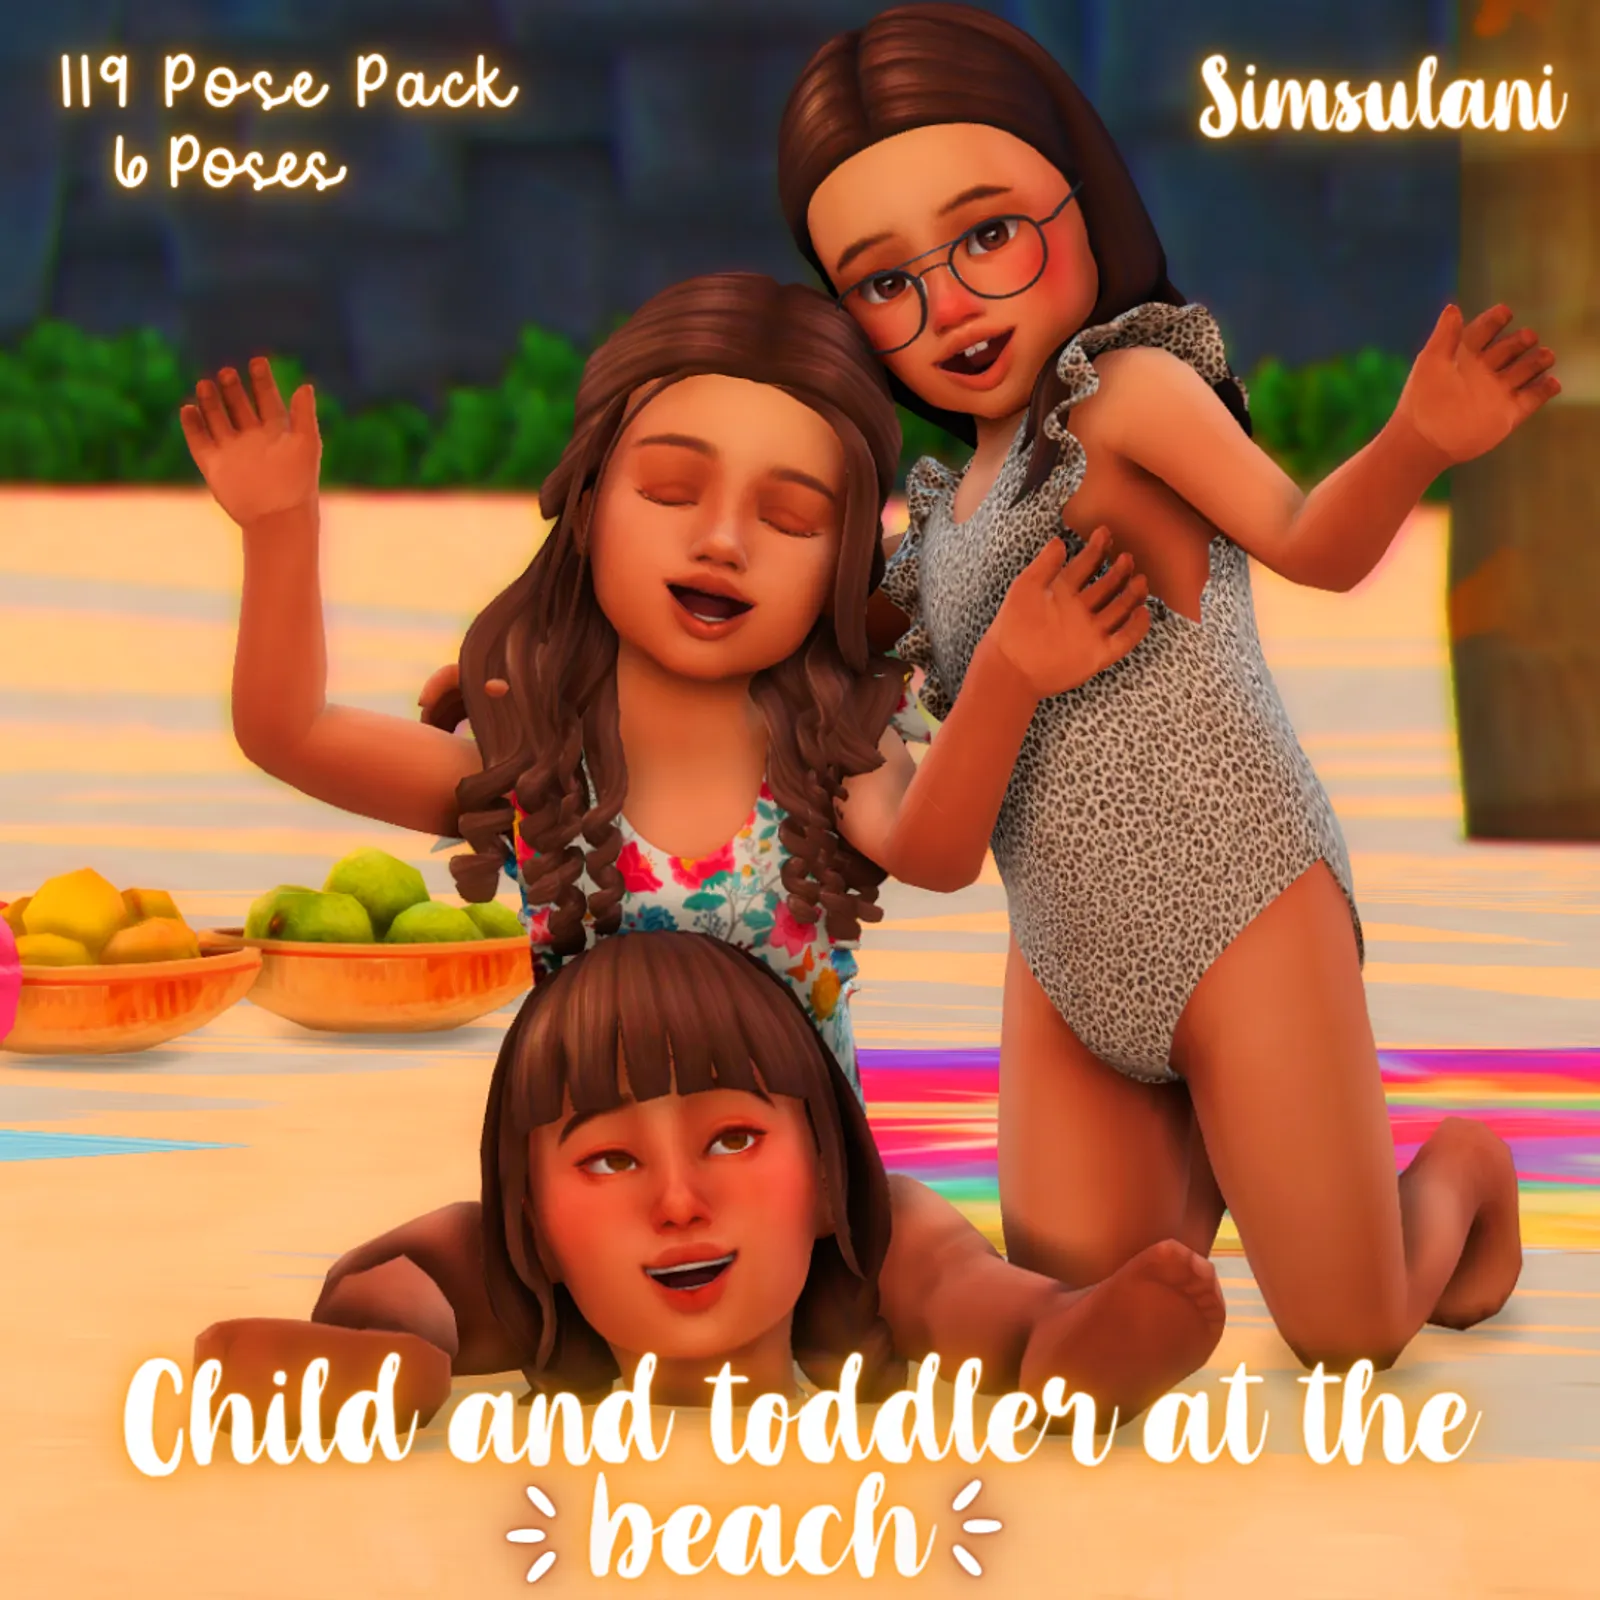 #119 Pose Pack - Child and toddler at the beach